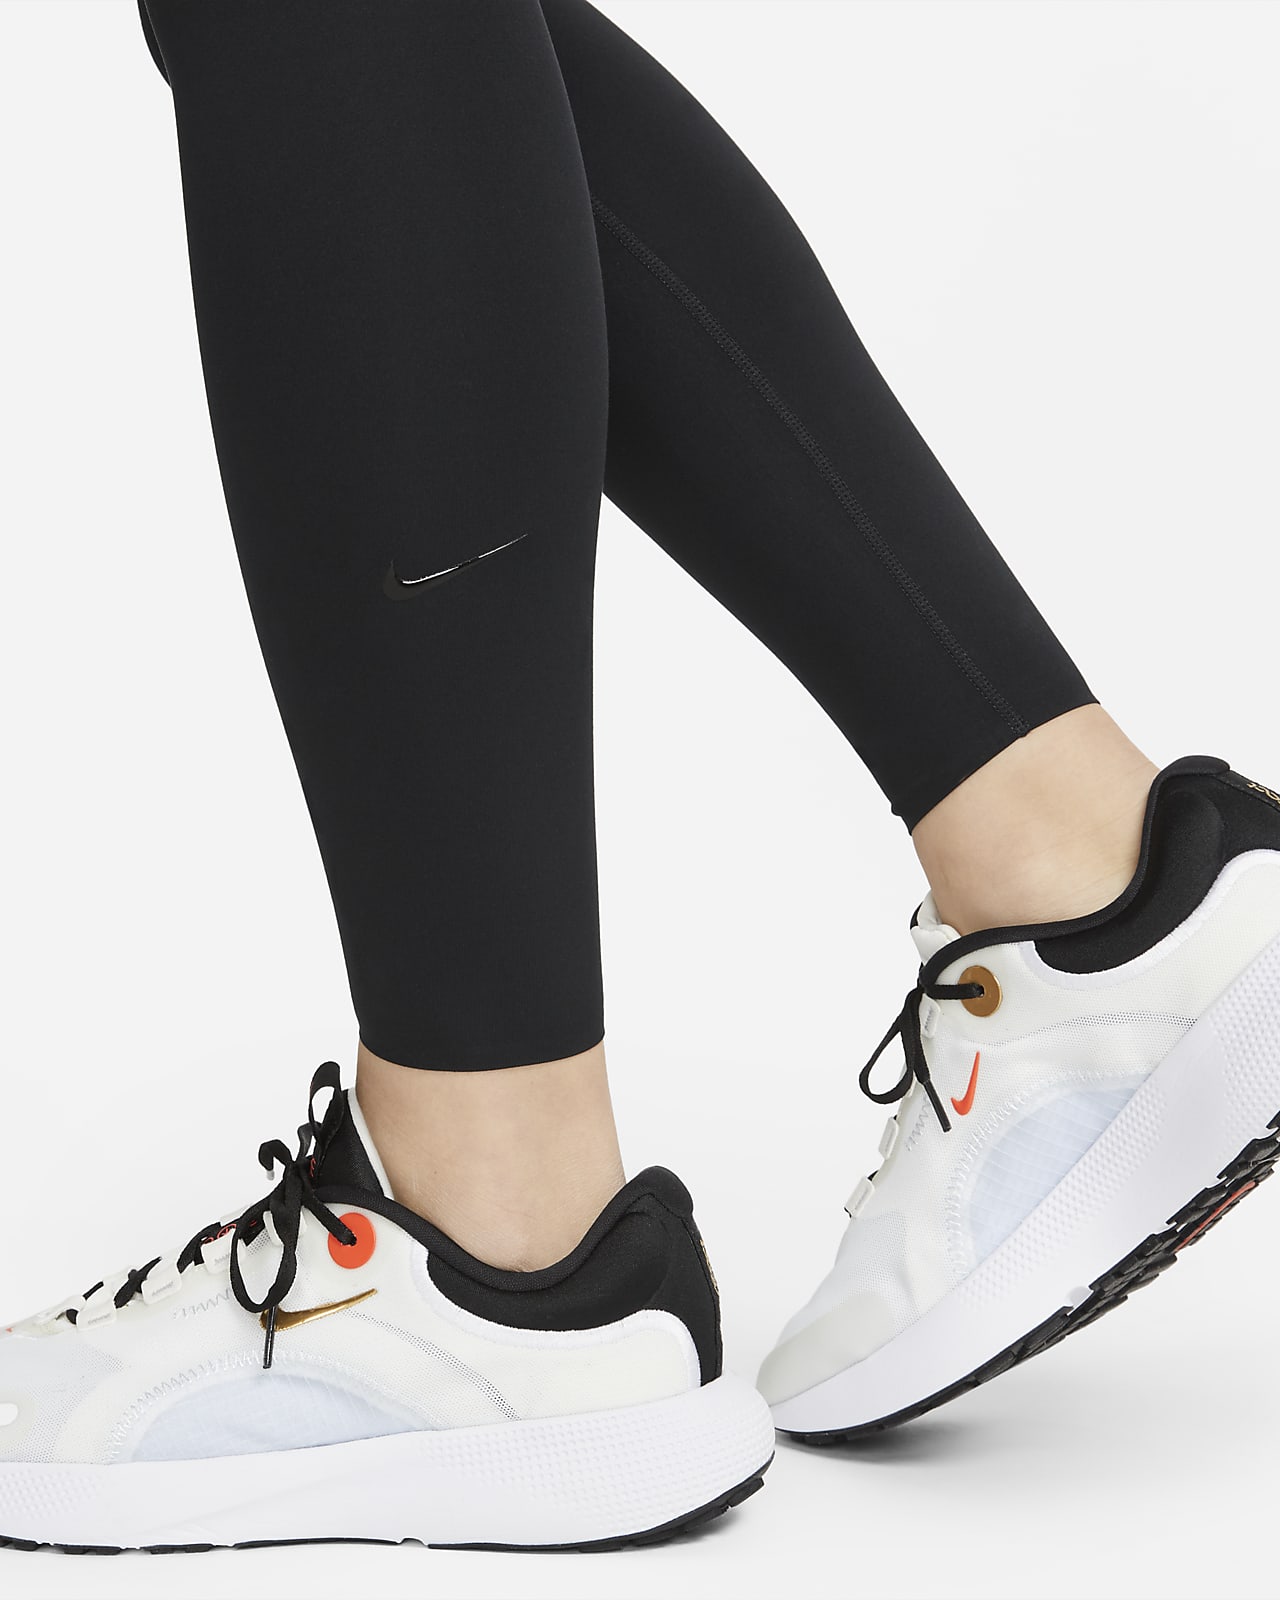 Nike Women's One Luxe Tights